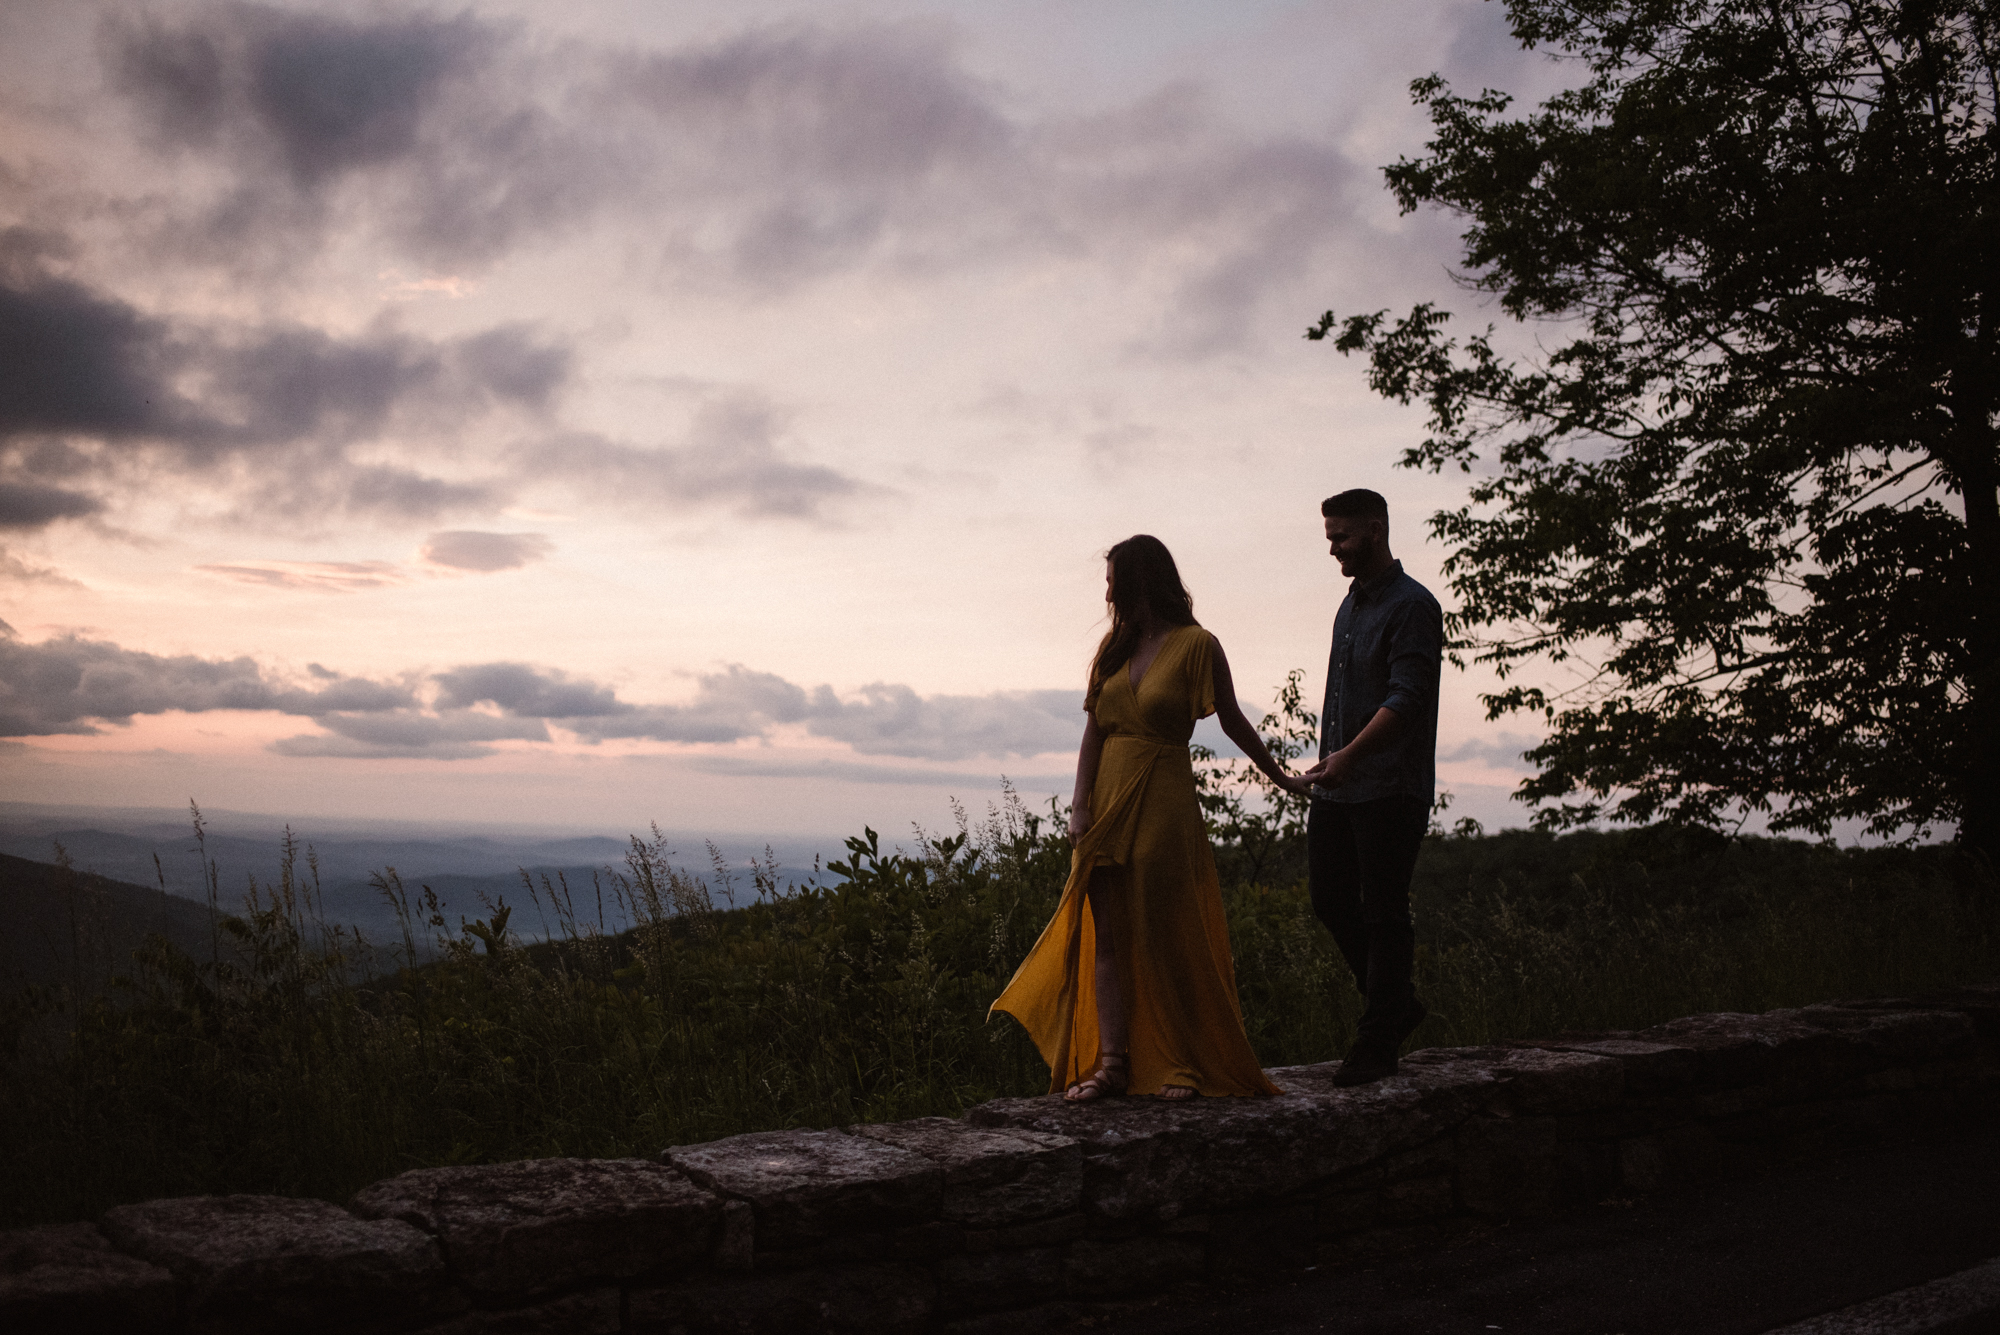 Camryn and Larry Sunrise Engagement Session in Shenandoah National Park - Things to Do in Luray Virginia - Adventurous Couple Photo Shoot White Sails Creative.jpg